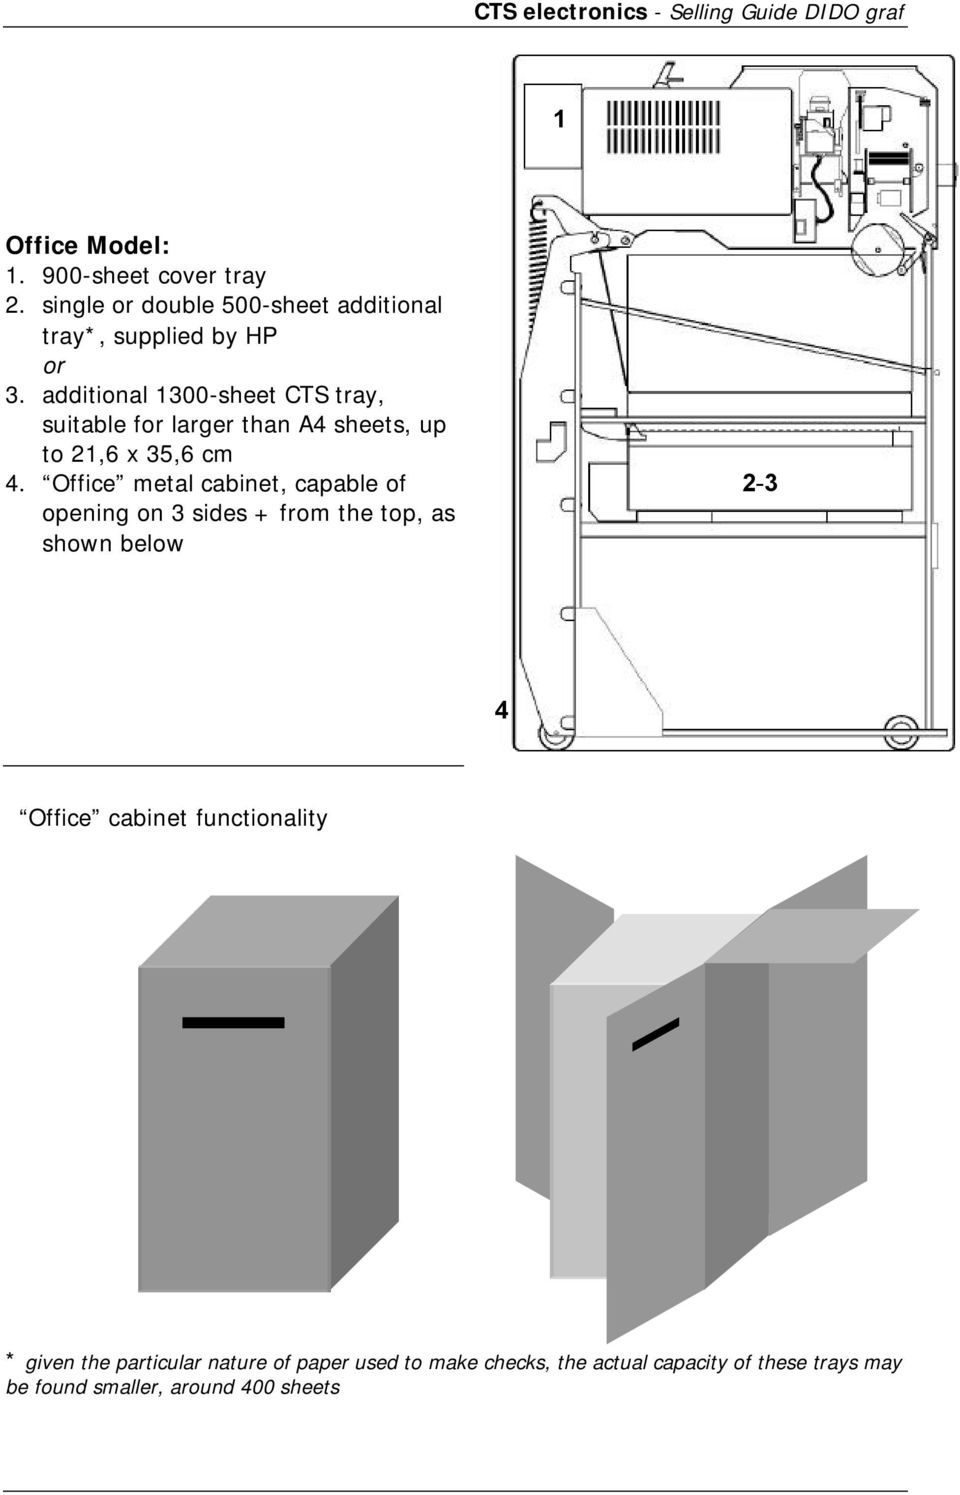 Office metal cabinet, capable of opening on 3 sides + from the top, as shown below 2-3 4 Office cabinet